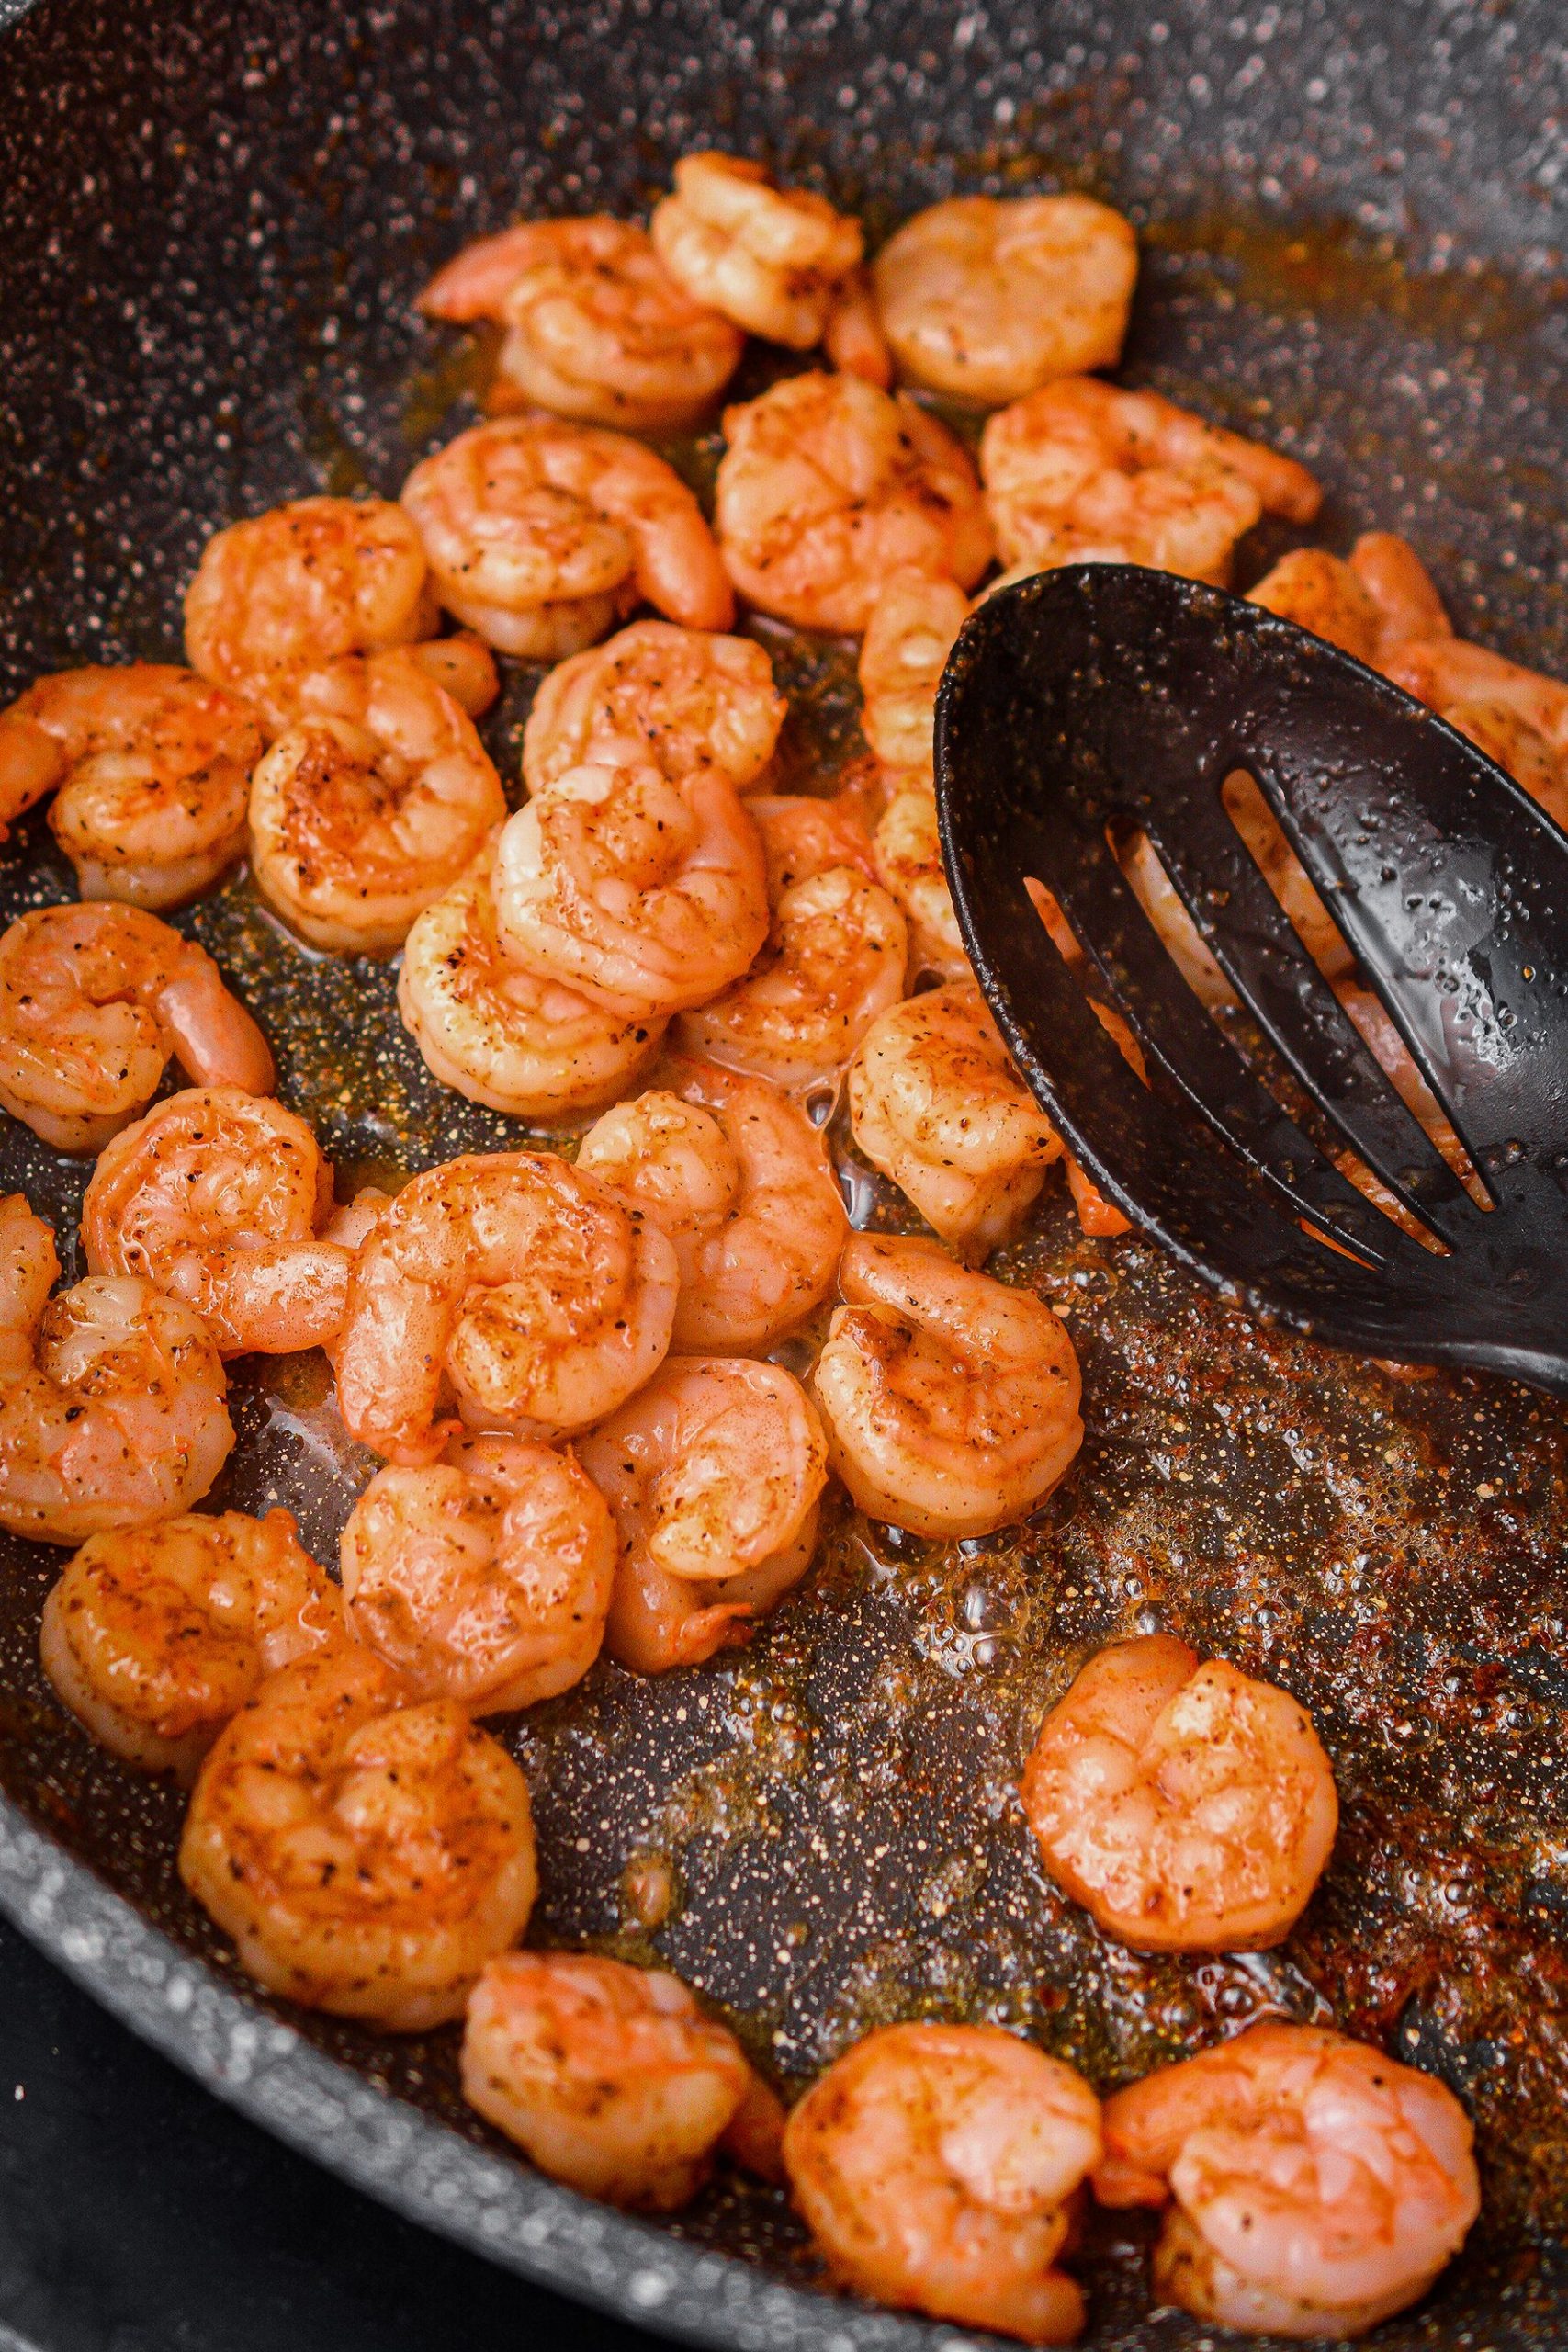 Heat 2 Tbsp. butter in a skillet over medium high heat and saute the shrimp with 1 Tbsp cajun seasoning until cooked through. Remove and set aside.